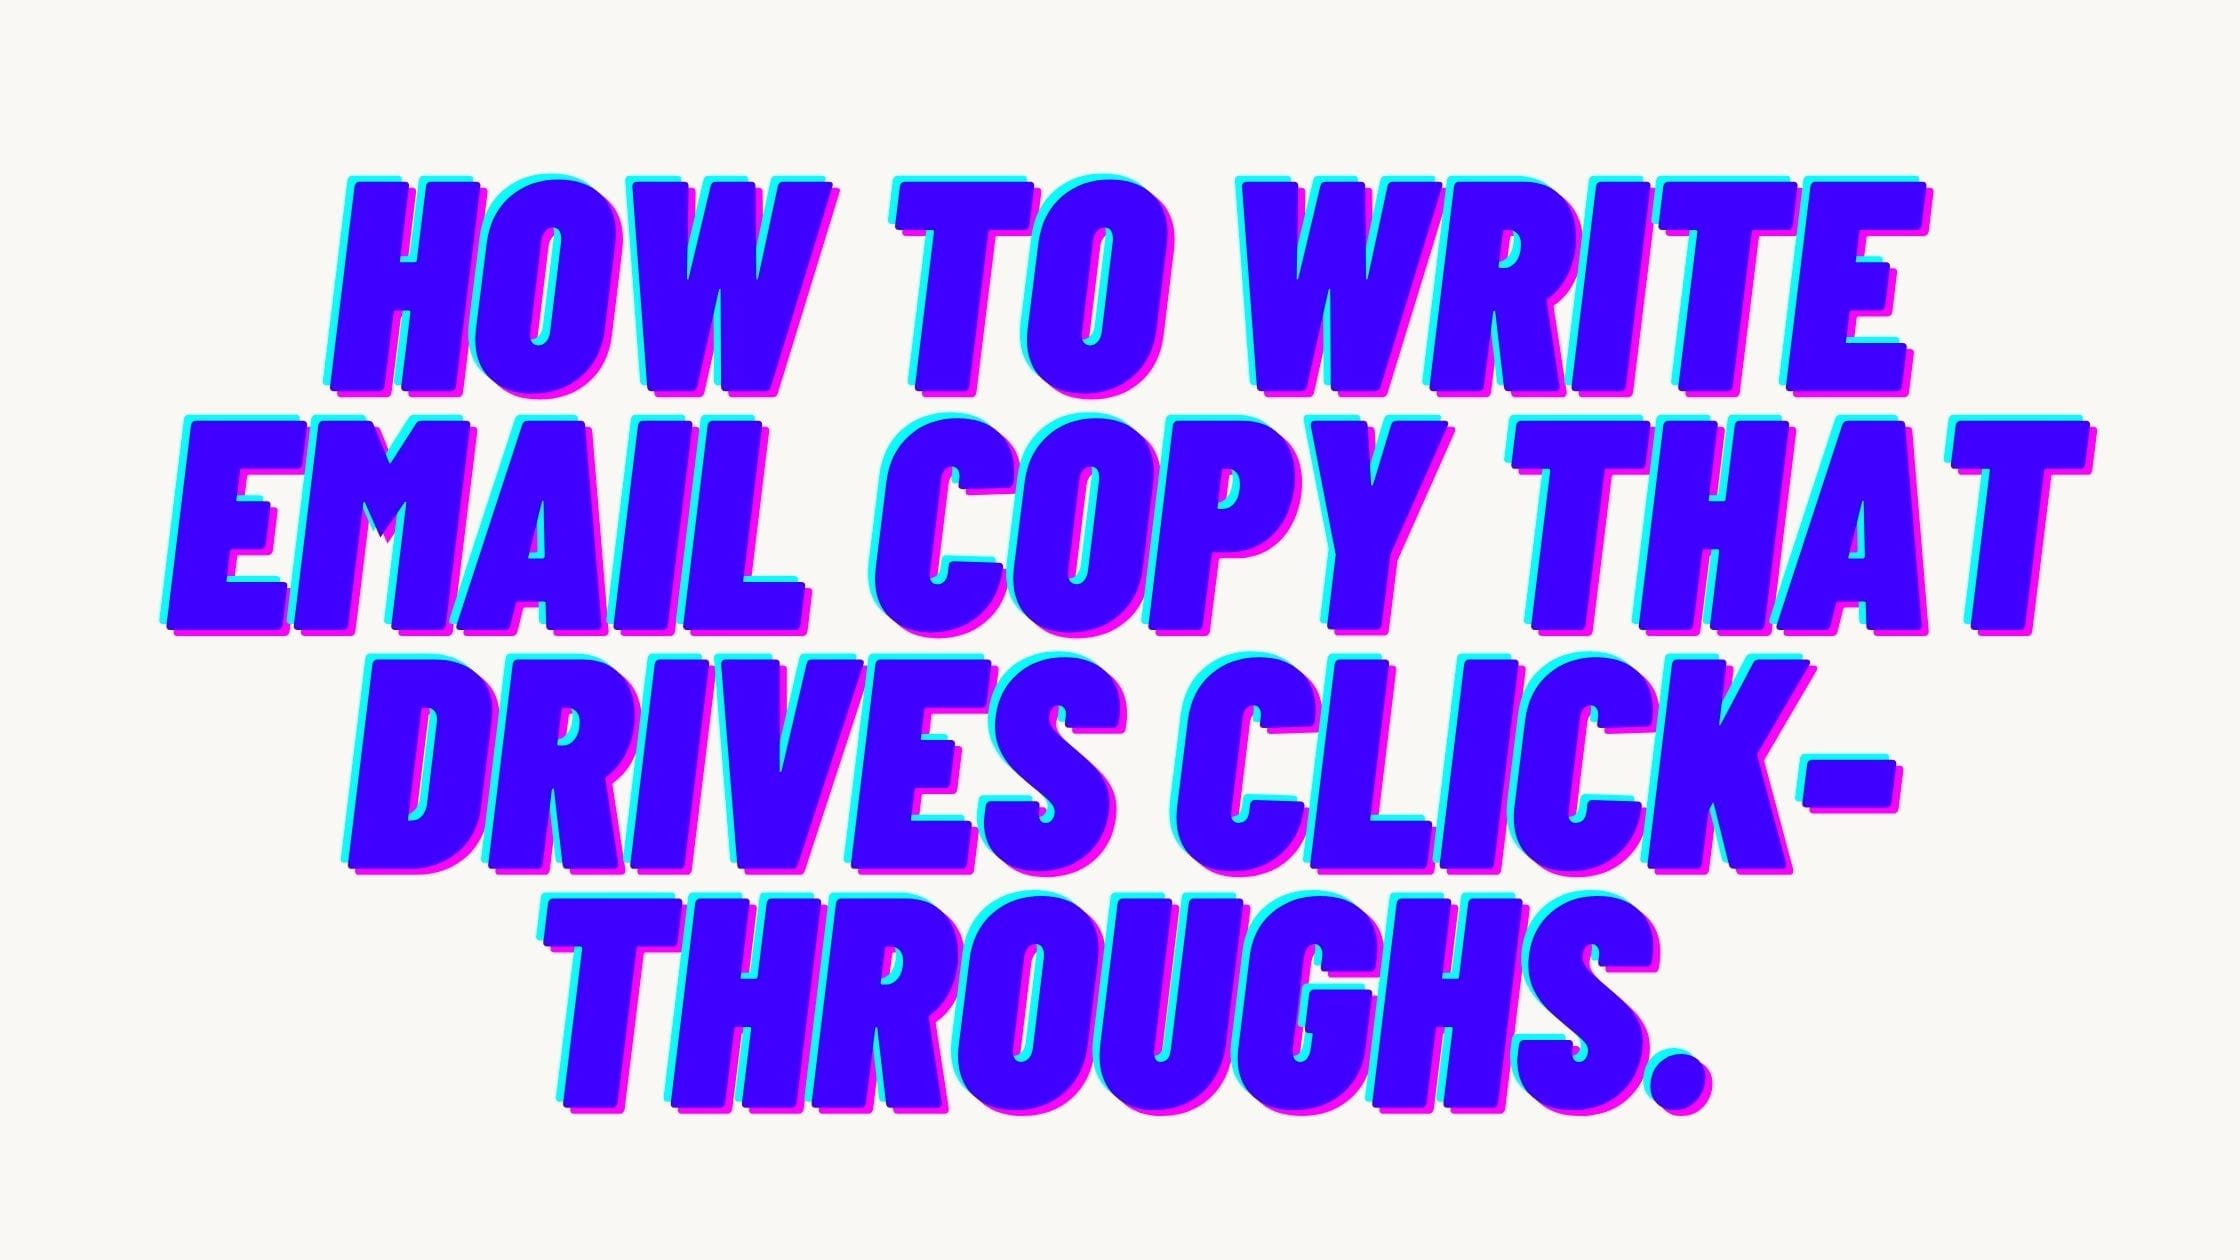 How to write email copy that drives click-throughs.